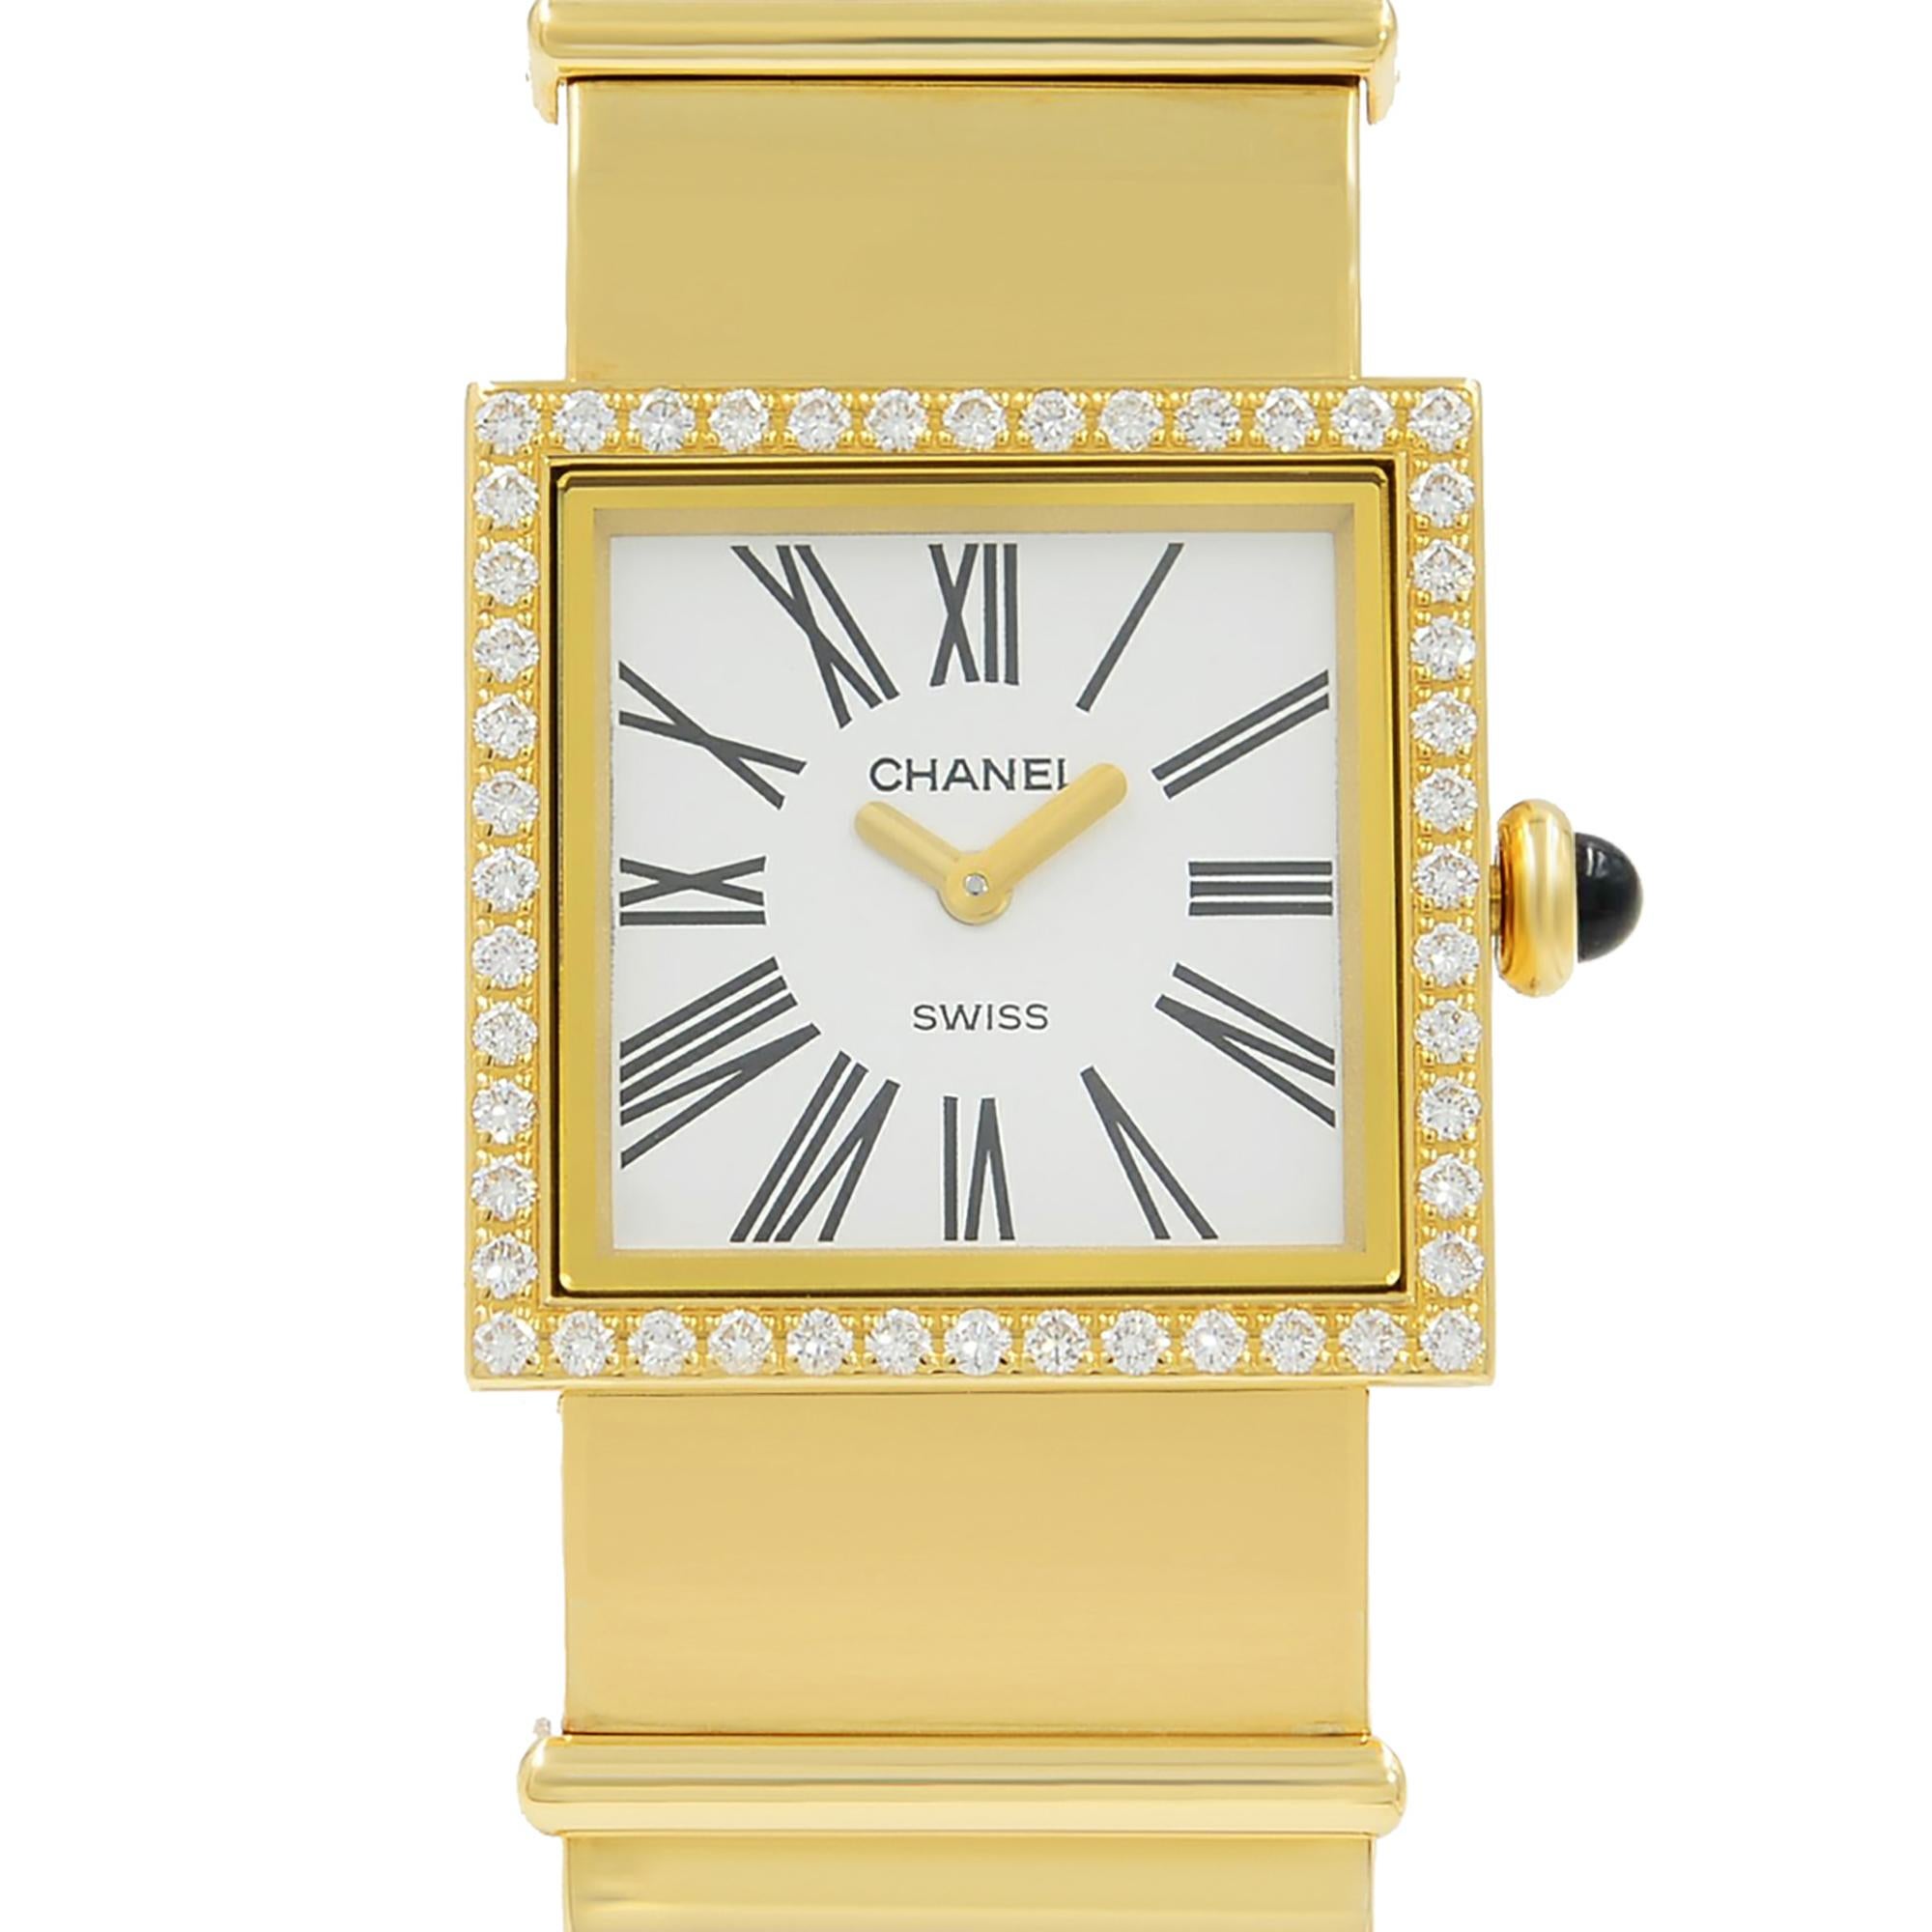 This pre-owned Chanel Mademoiselle  N/A is a beautiful Ladies timepiece that is powered by a quartz movement which is cased in a yellow gold case. It has a square shape face, diamonds dial and has hand roman numerals style markers. It is completed